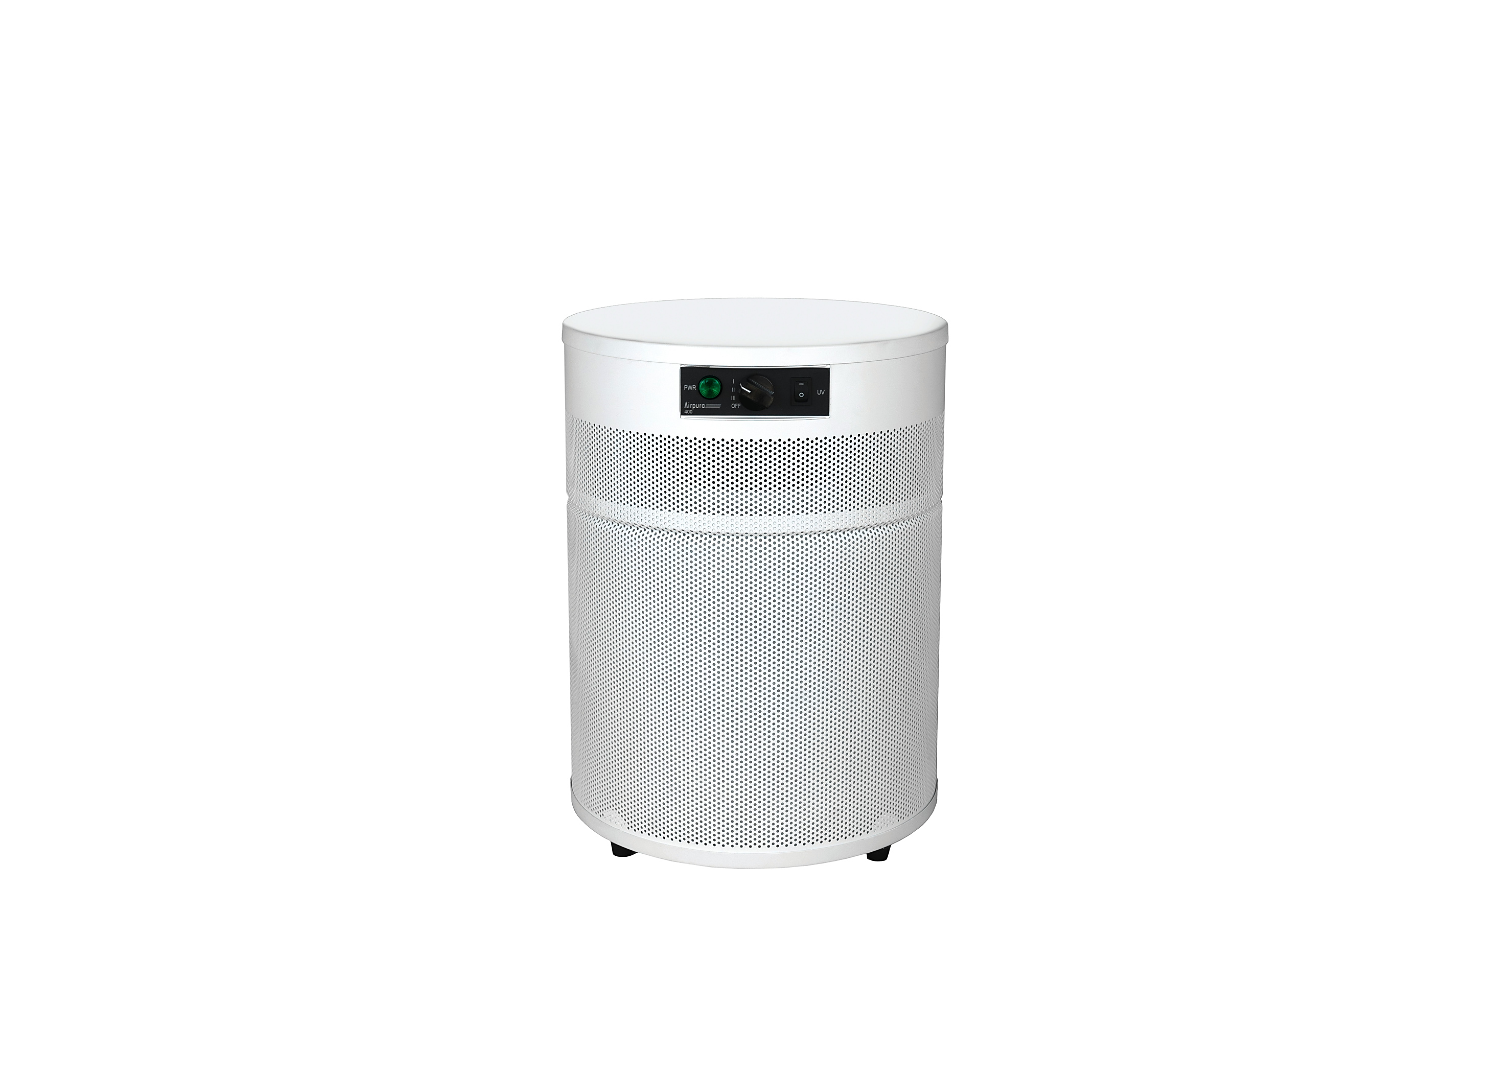 Airpura V400 Compact For Chemicals, VOCS & Particles, Covers 1000 Sq. Ft.